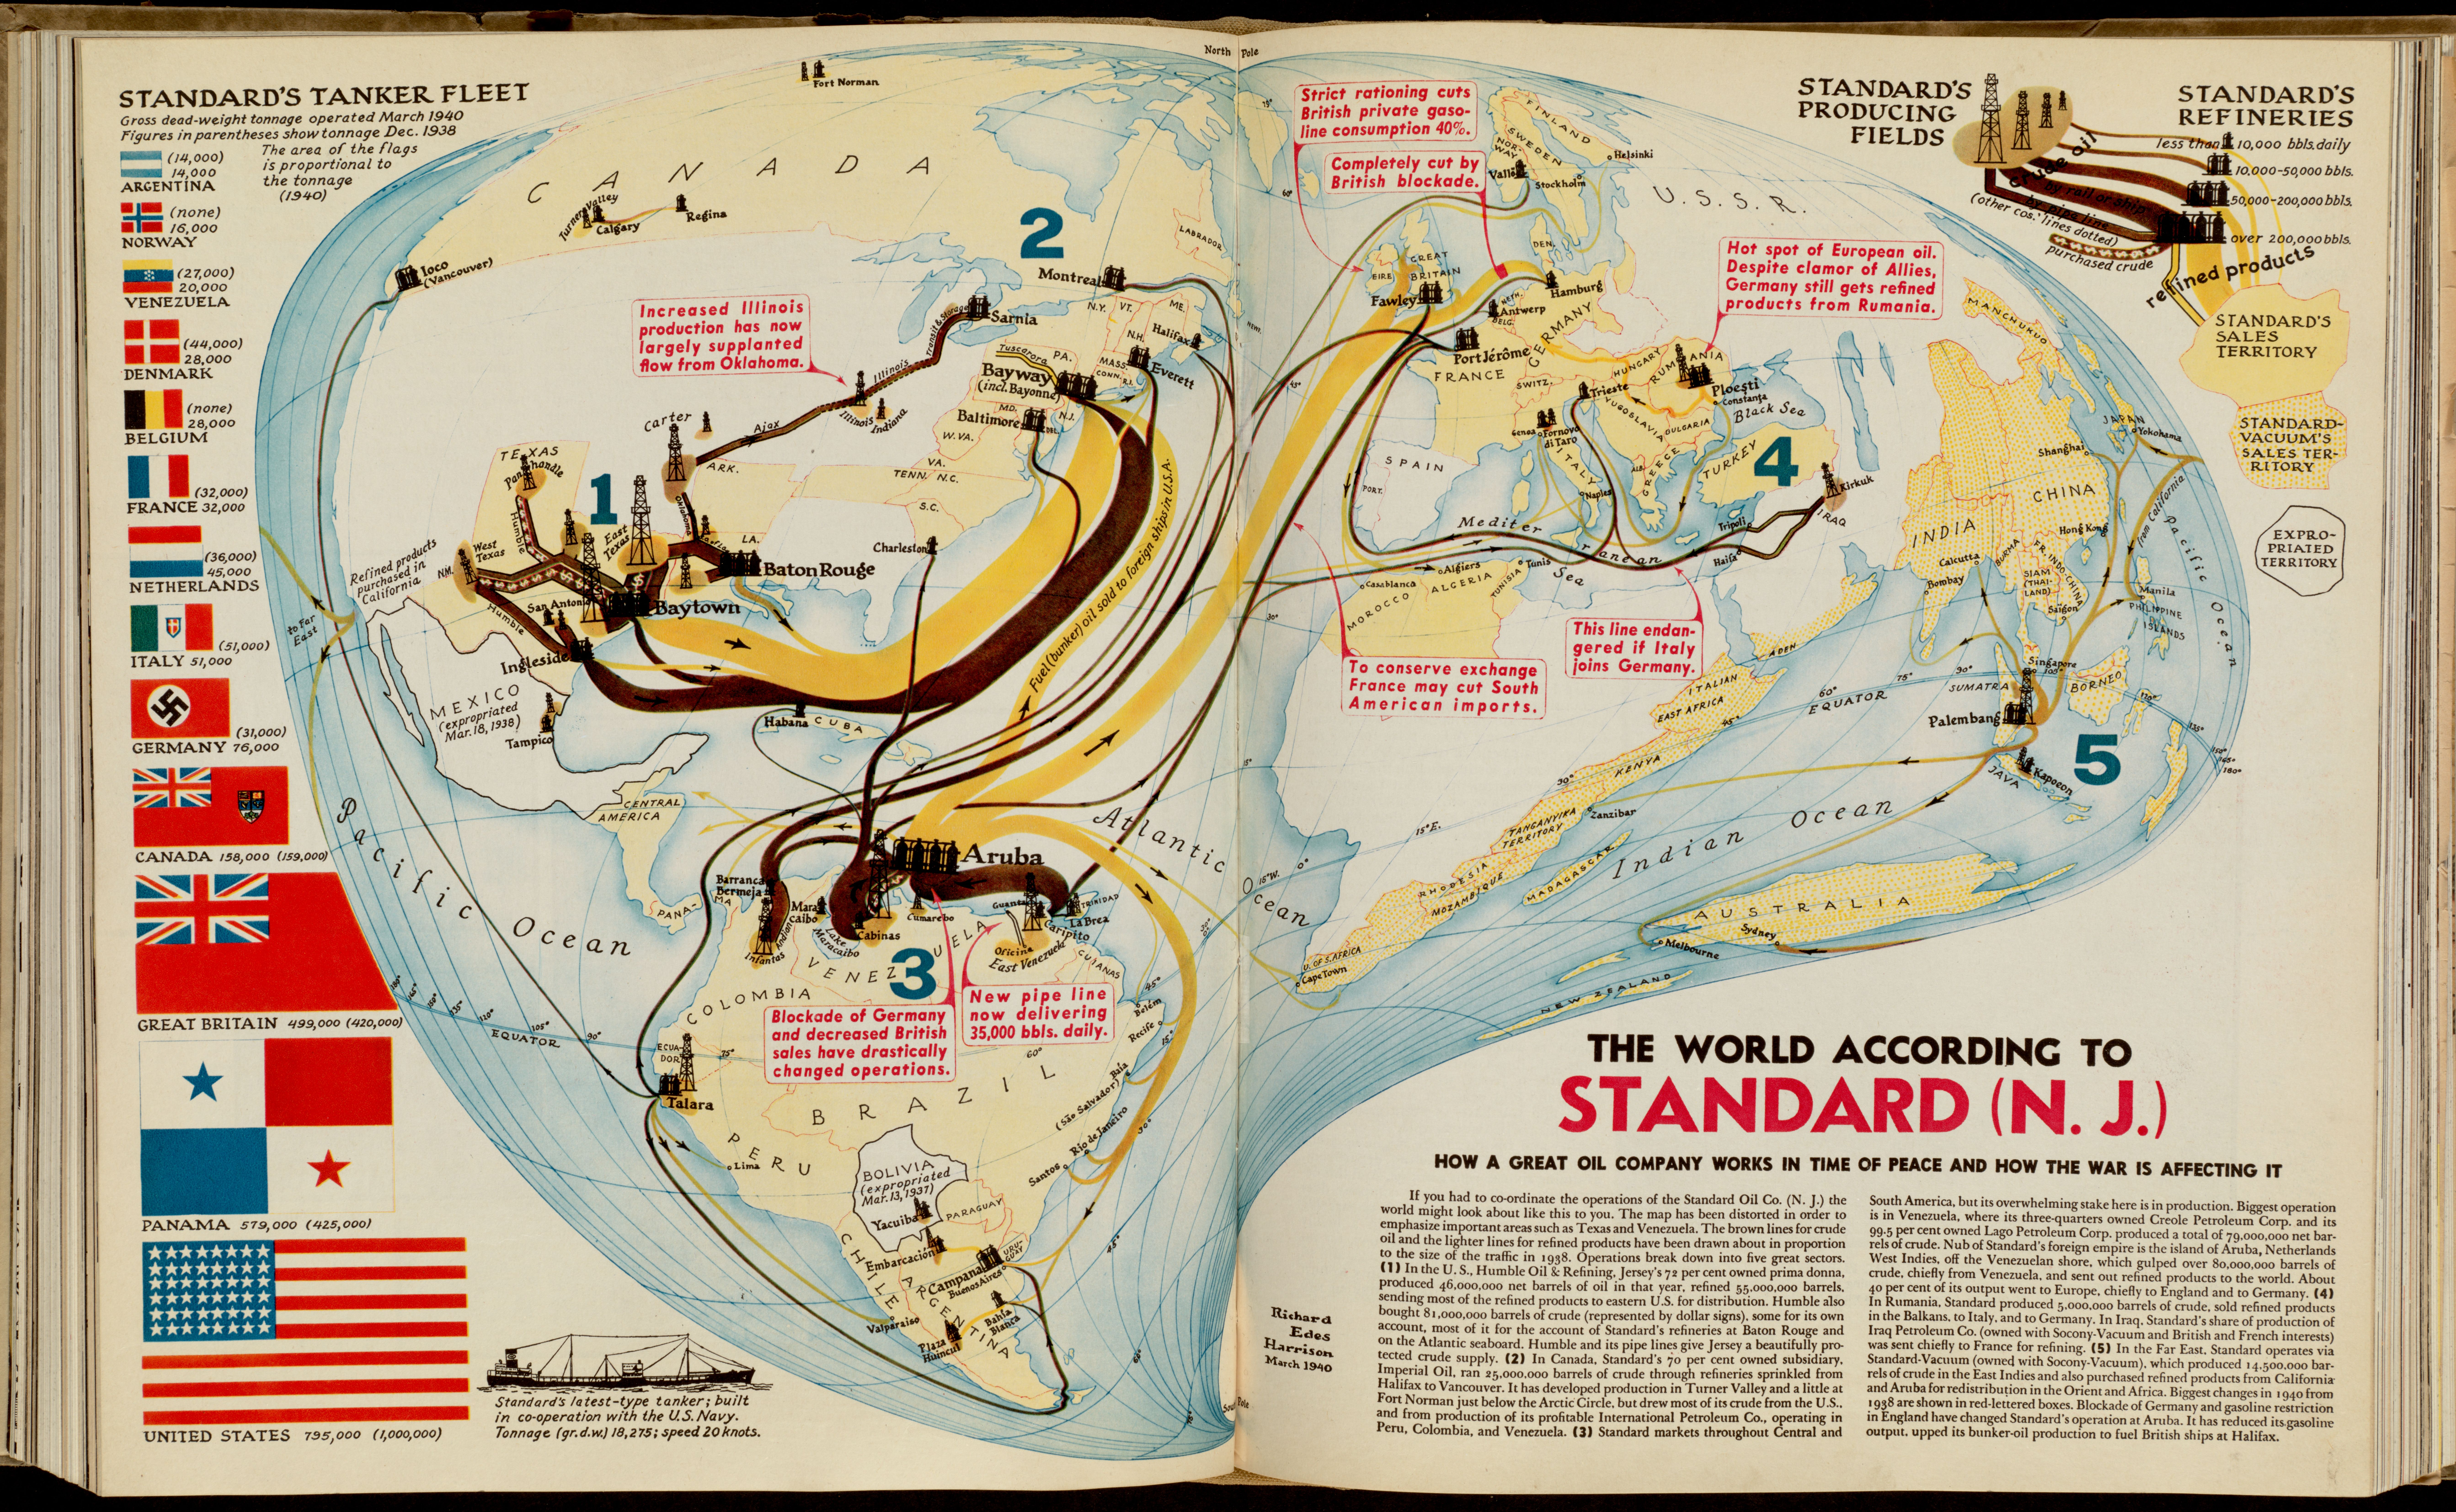 This 1940 map from Fortune magazine portrays the world according to Standard Oil.